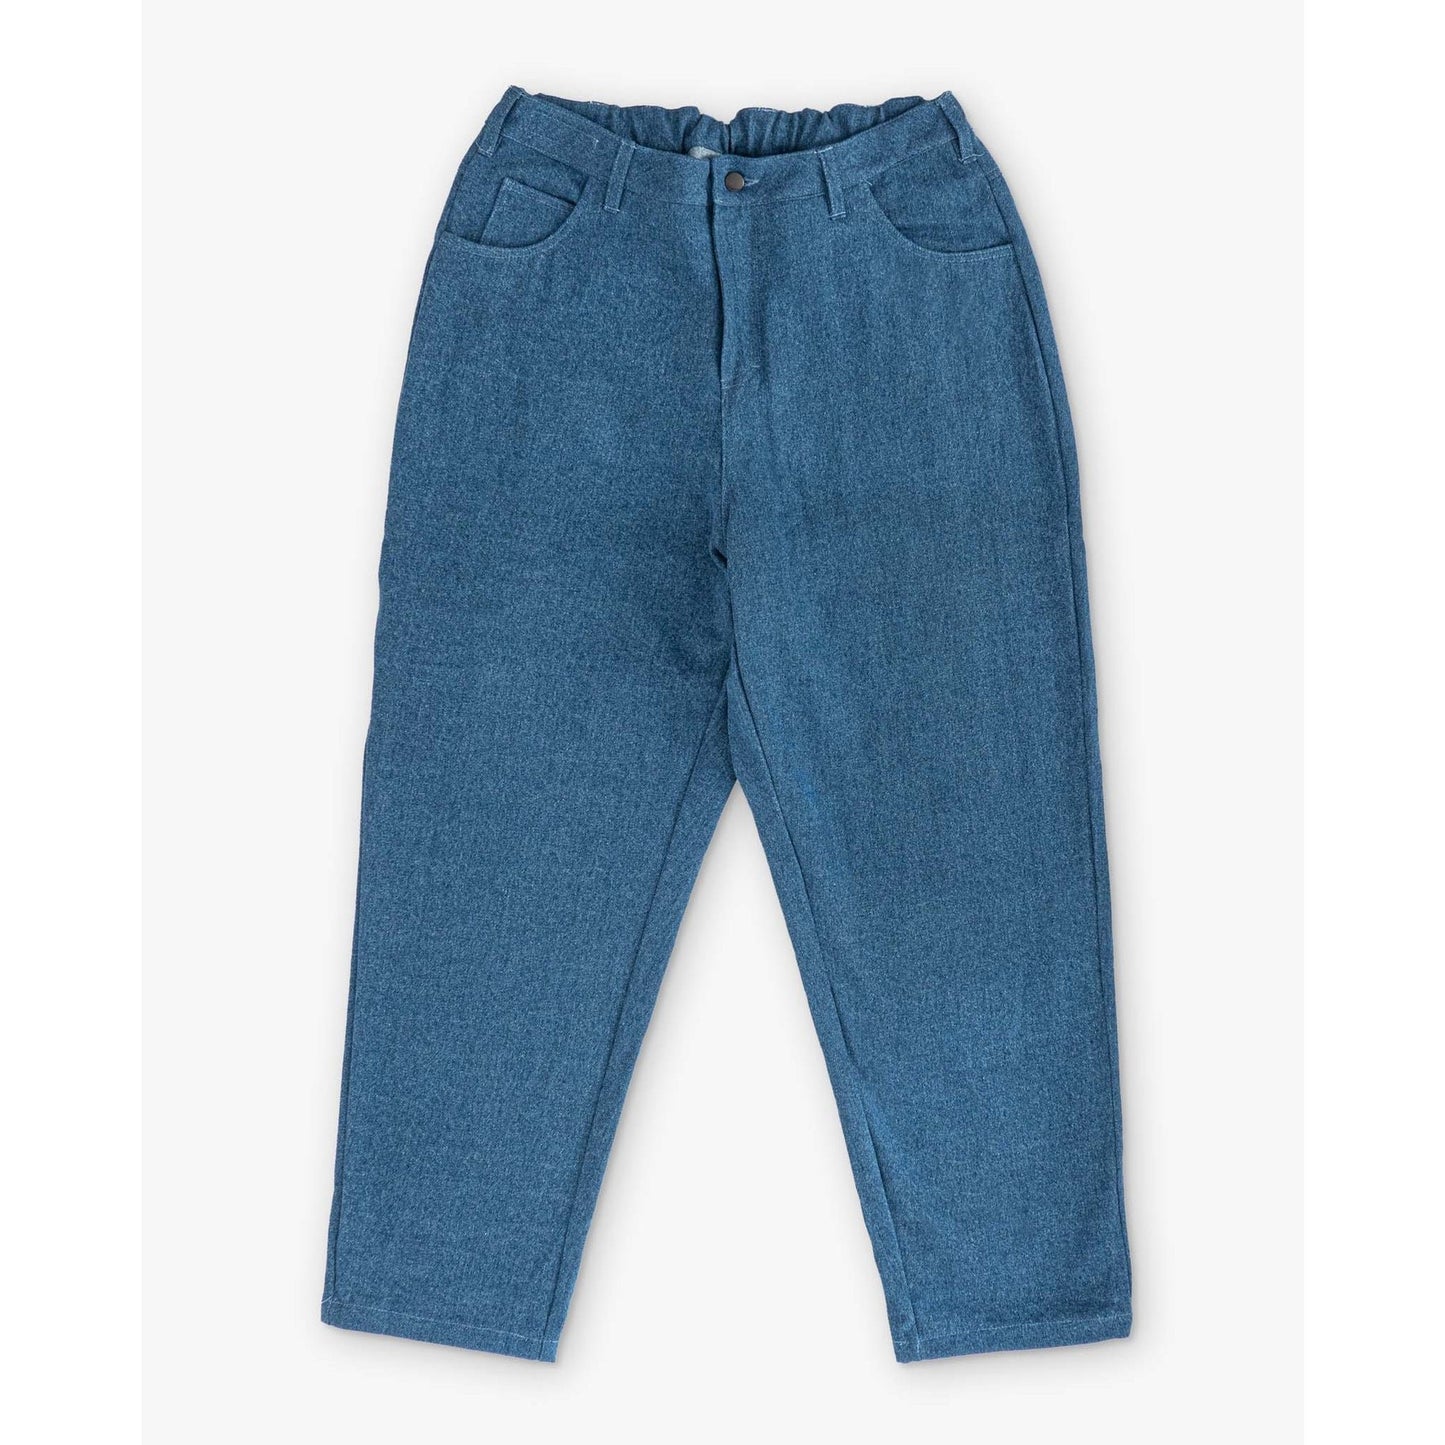 POETIC COLLECTIVE TAPERED JEANSS - LIGHT DENIM